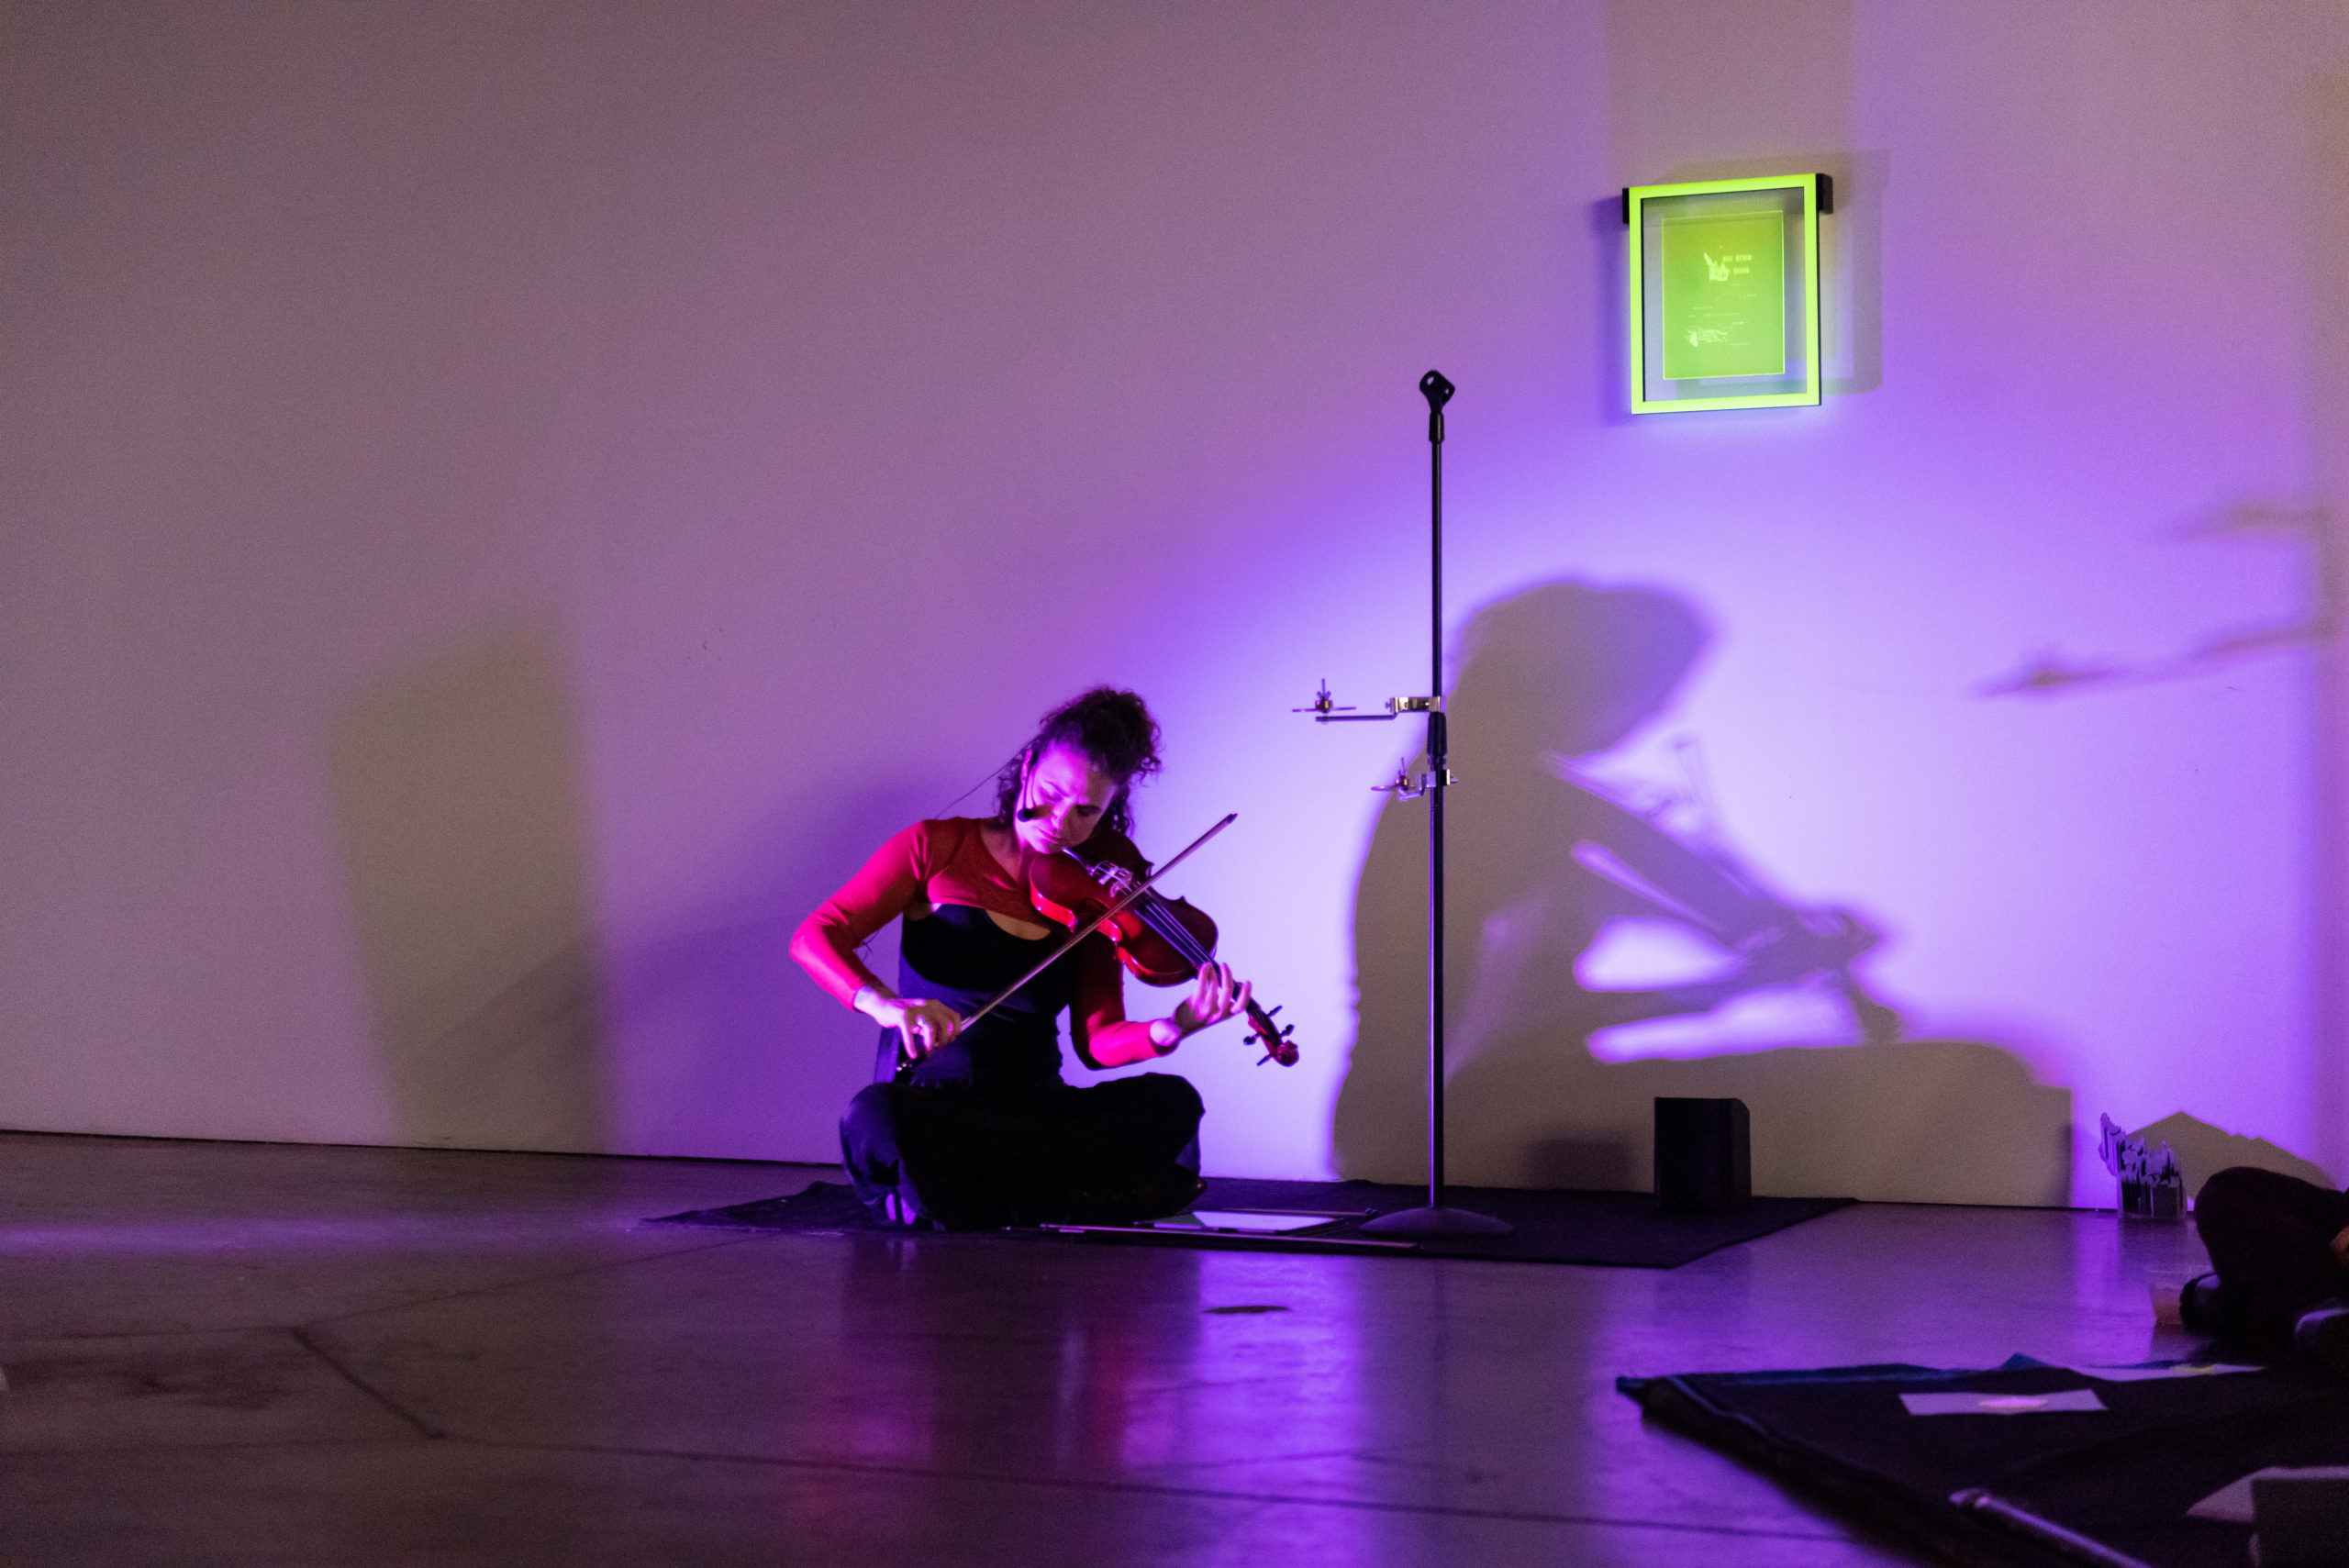 A woman seated on the ground plays the violin, her shadow cast behind her and a rectangular piece of translucent yellow acrylic hanging above it.